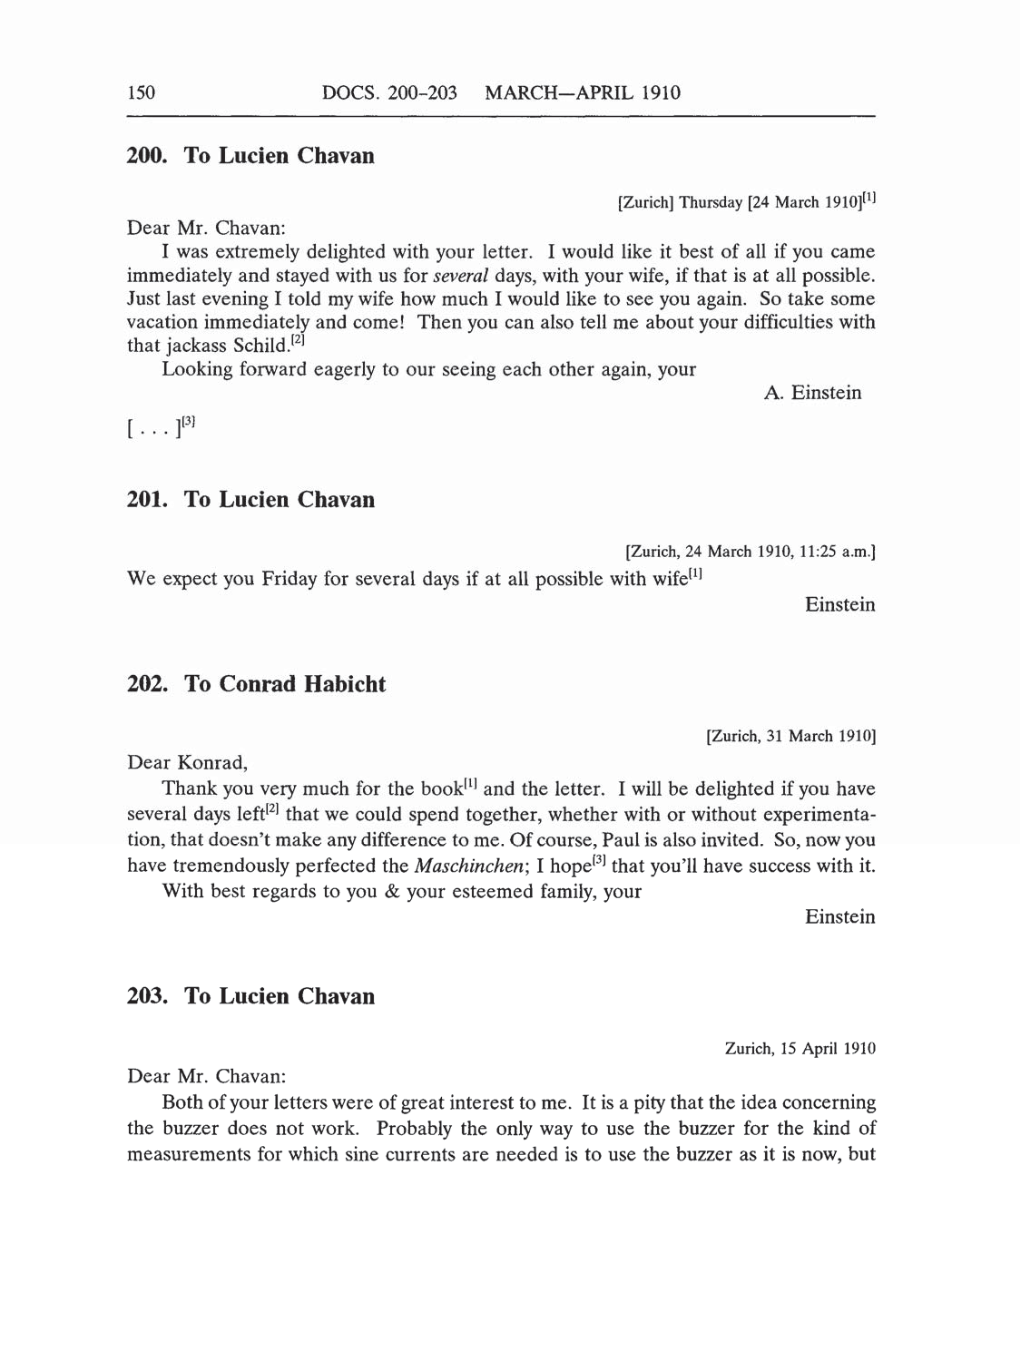 Volume 5: The Swiss Years: Correspondence, 1902-1914 (English translation supplement) page 150